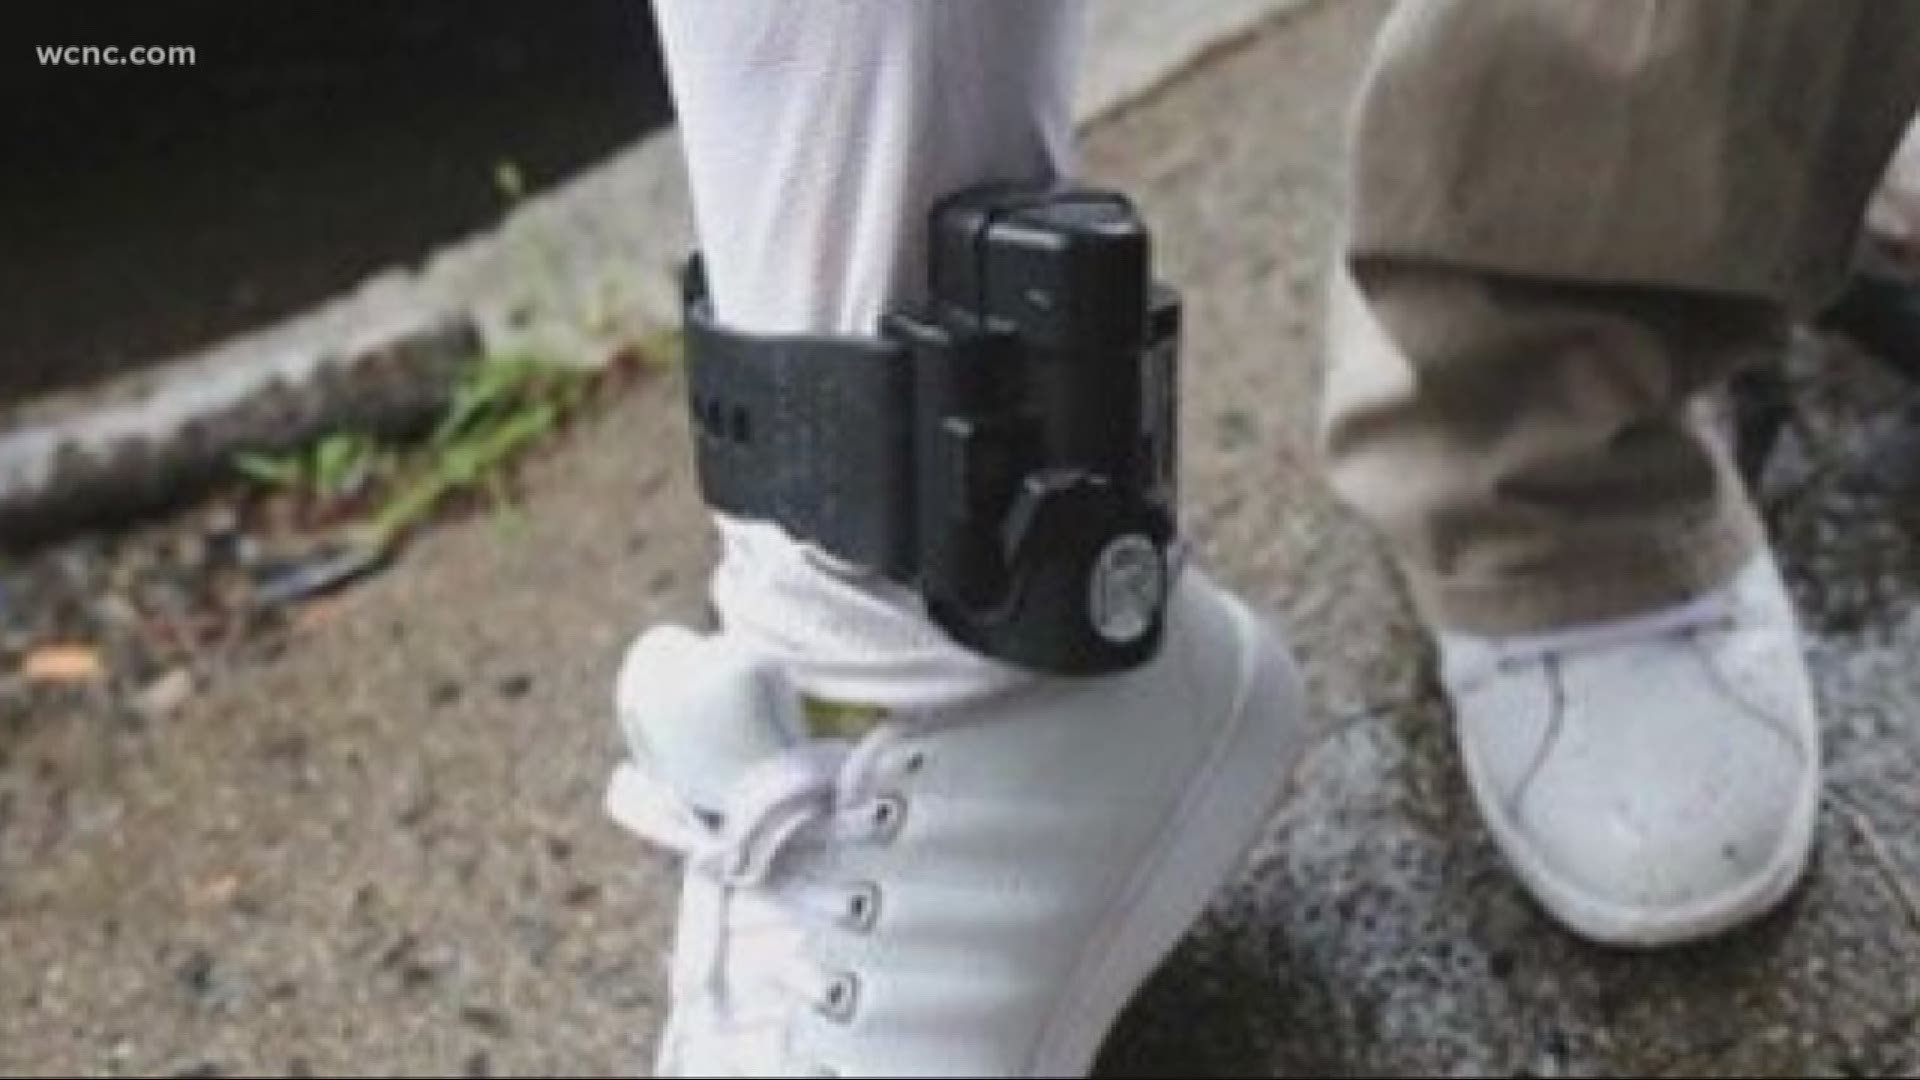 As the number of murders continues to go up, the police chief has criticized judges' reliance on controversial ankle bracelets, especially for violent defendants.